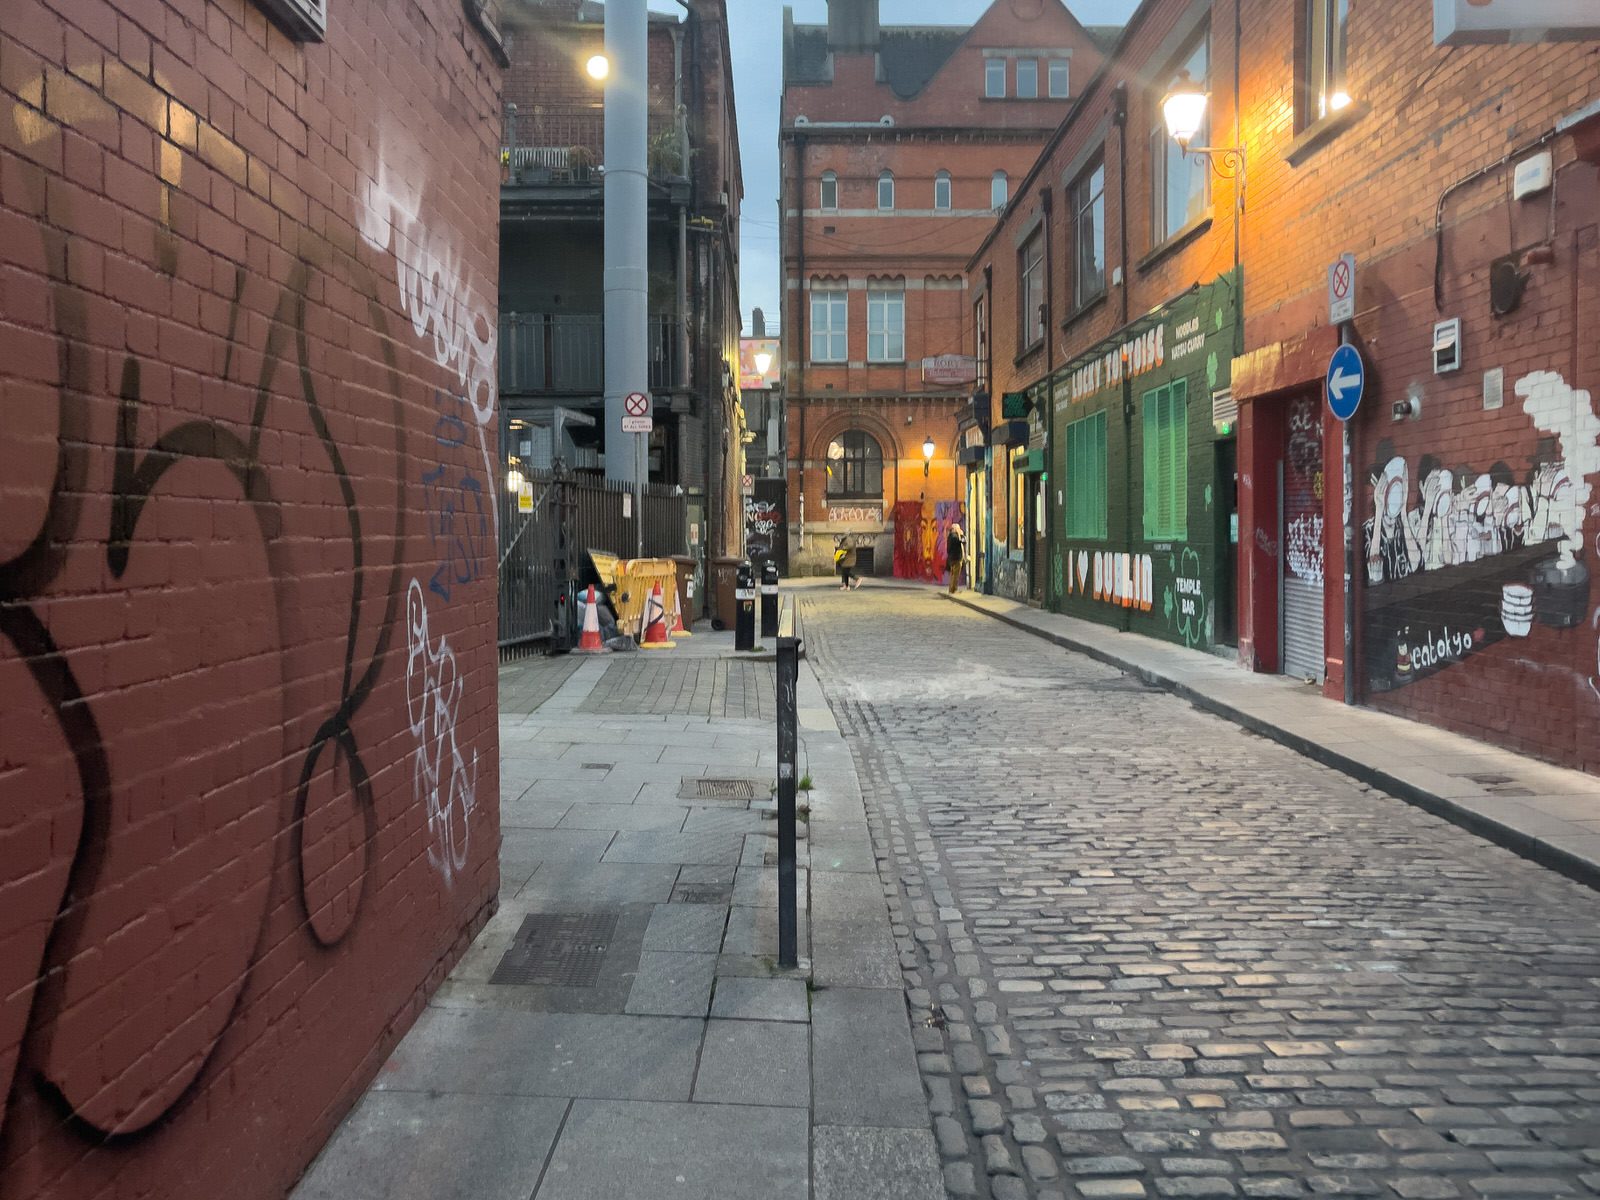 I VISITED TEMPLE BAR TODAY [AS NIGHTFALL WAS APPROACHING]-225335-1